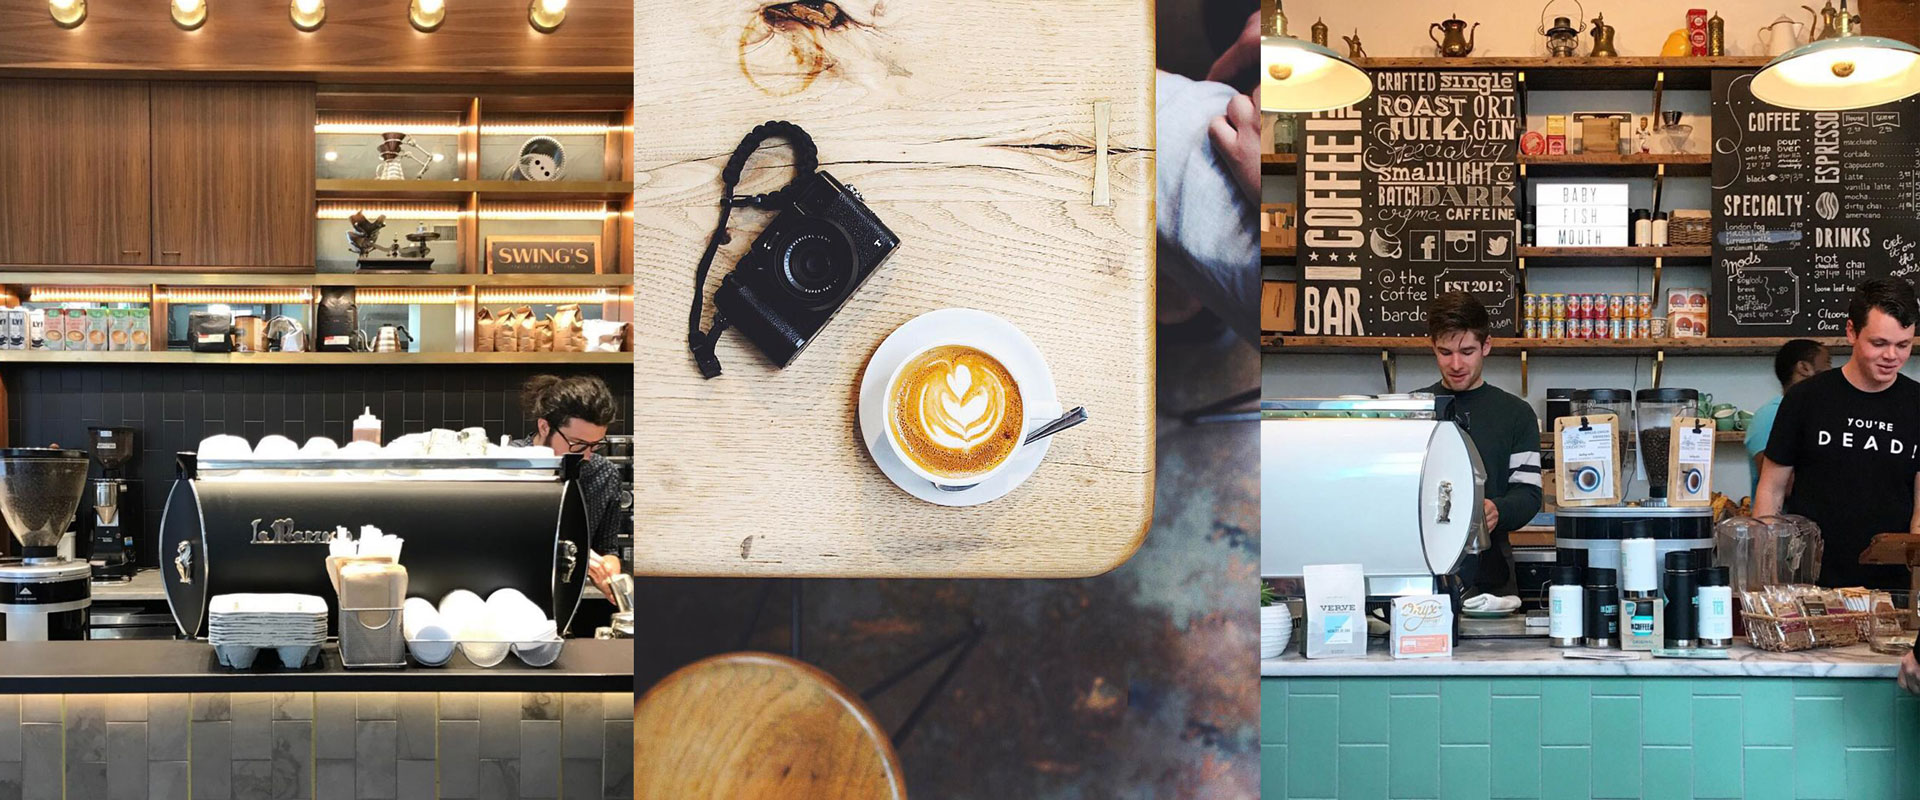 The 13 Best Coffee Shops in Washington DC: Instagrammers Guide